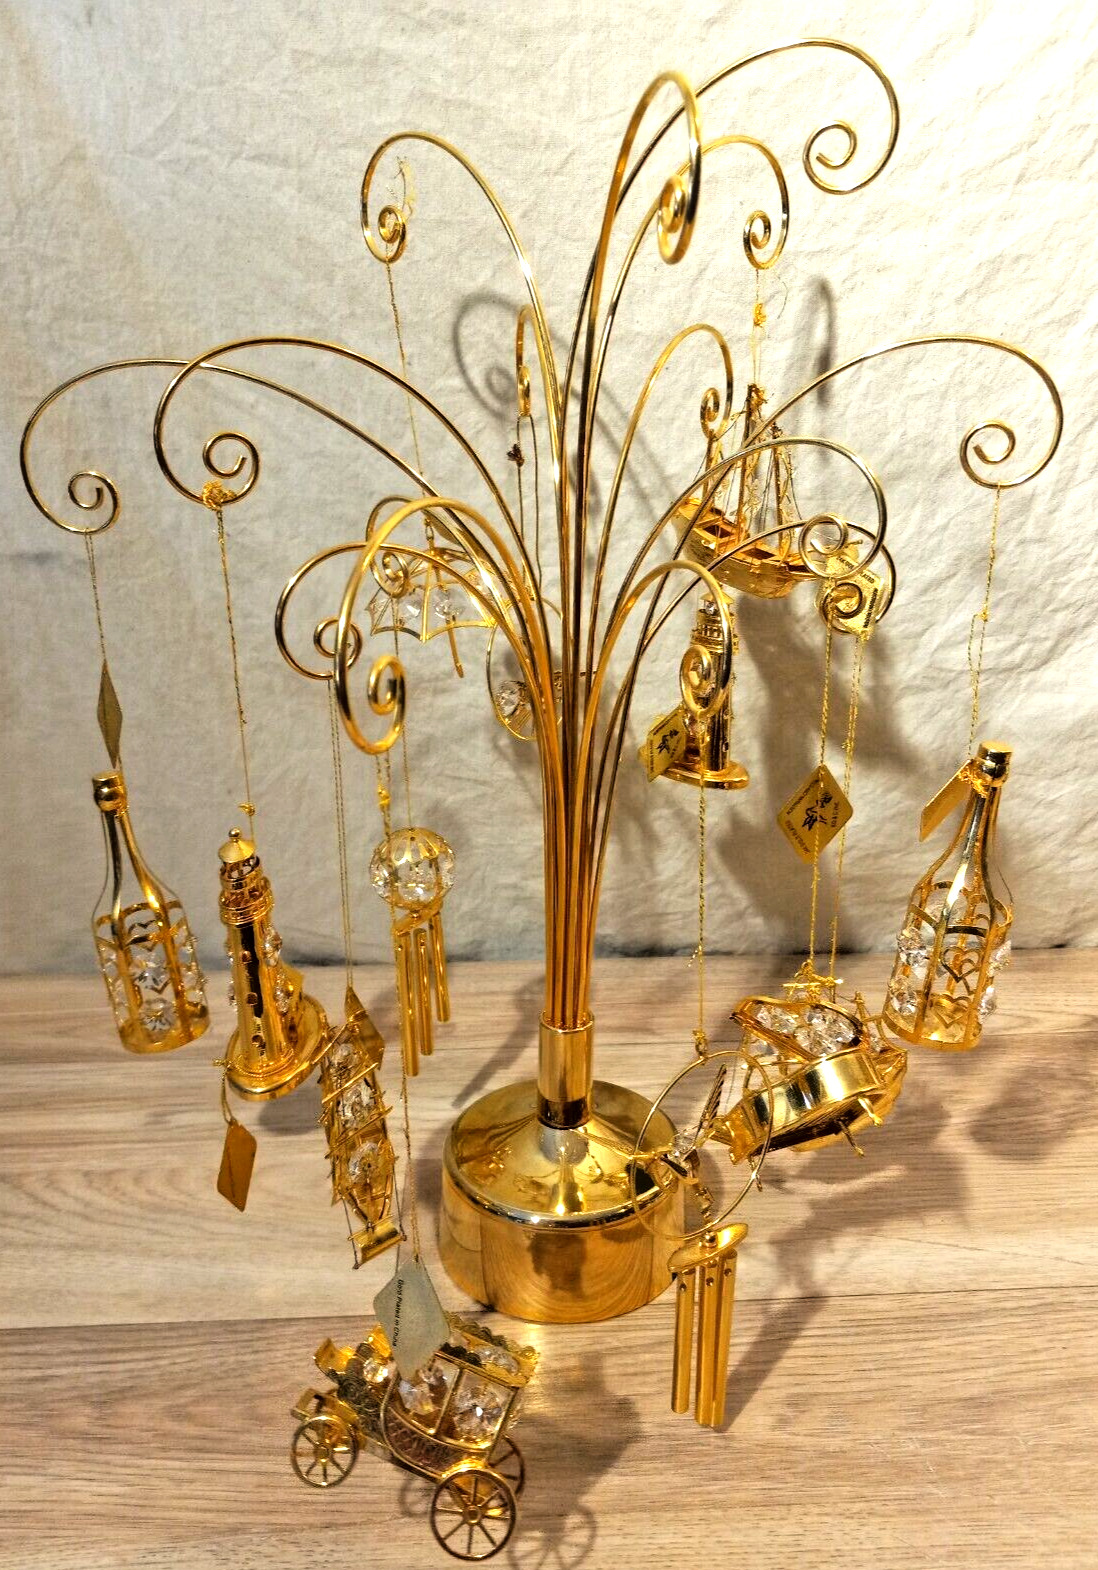 13x KG & C Inc AUSTRIAN CRYSTAL 24K Gold Plated Ornaments With Display Stand